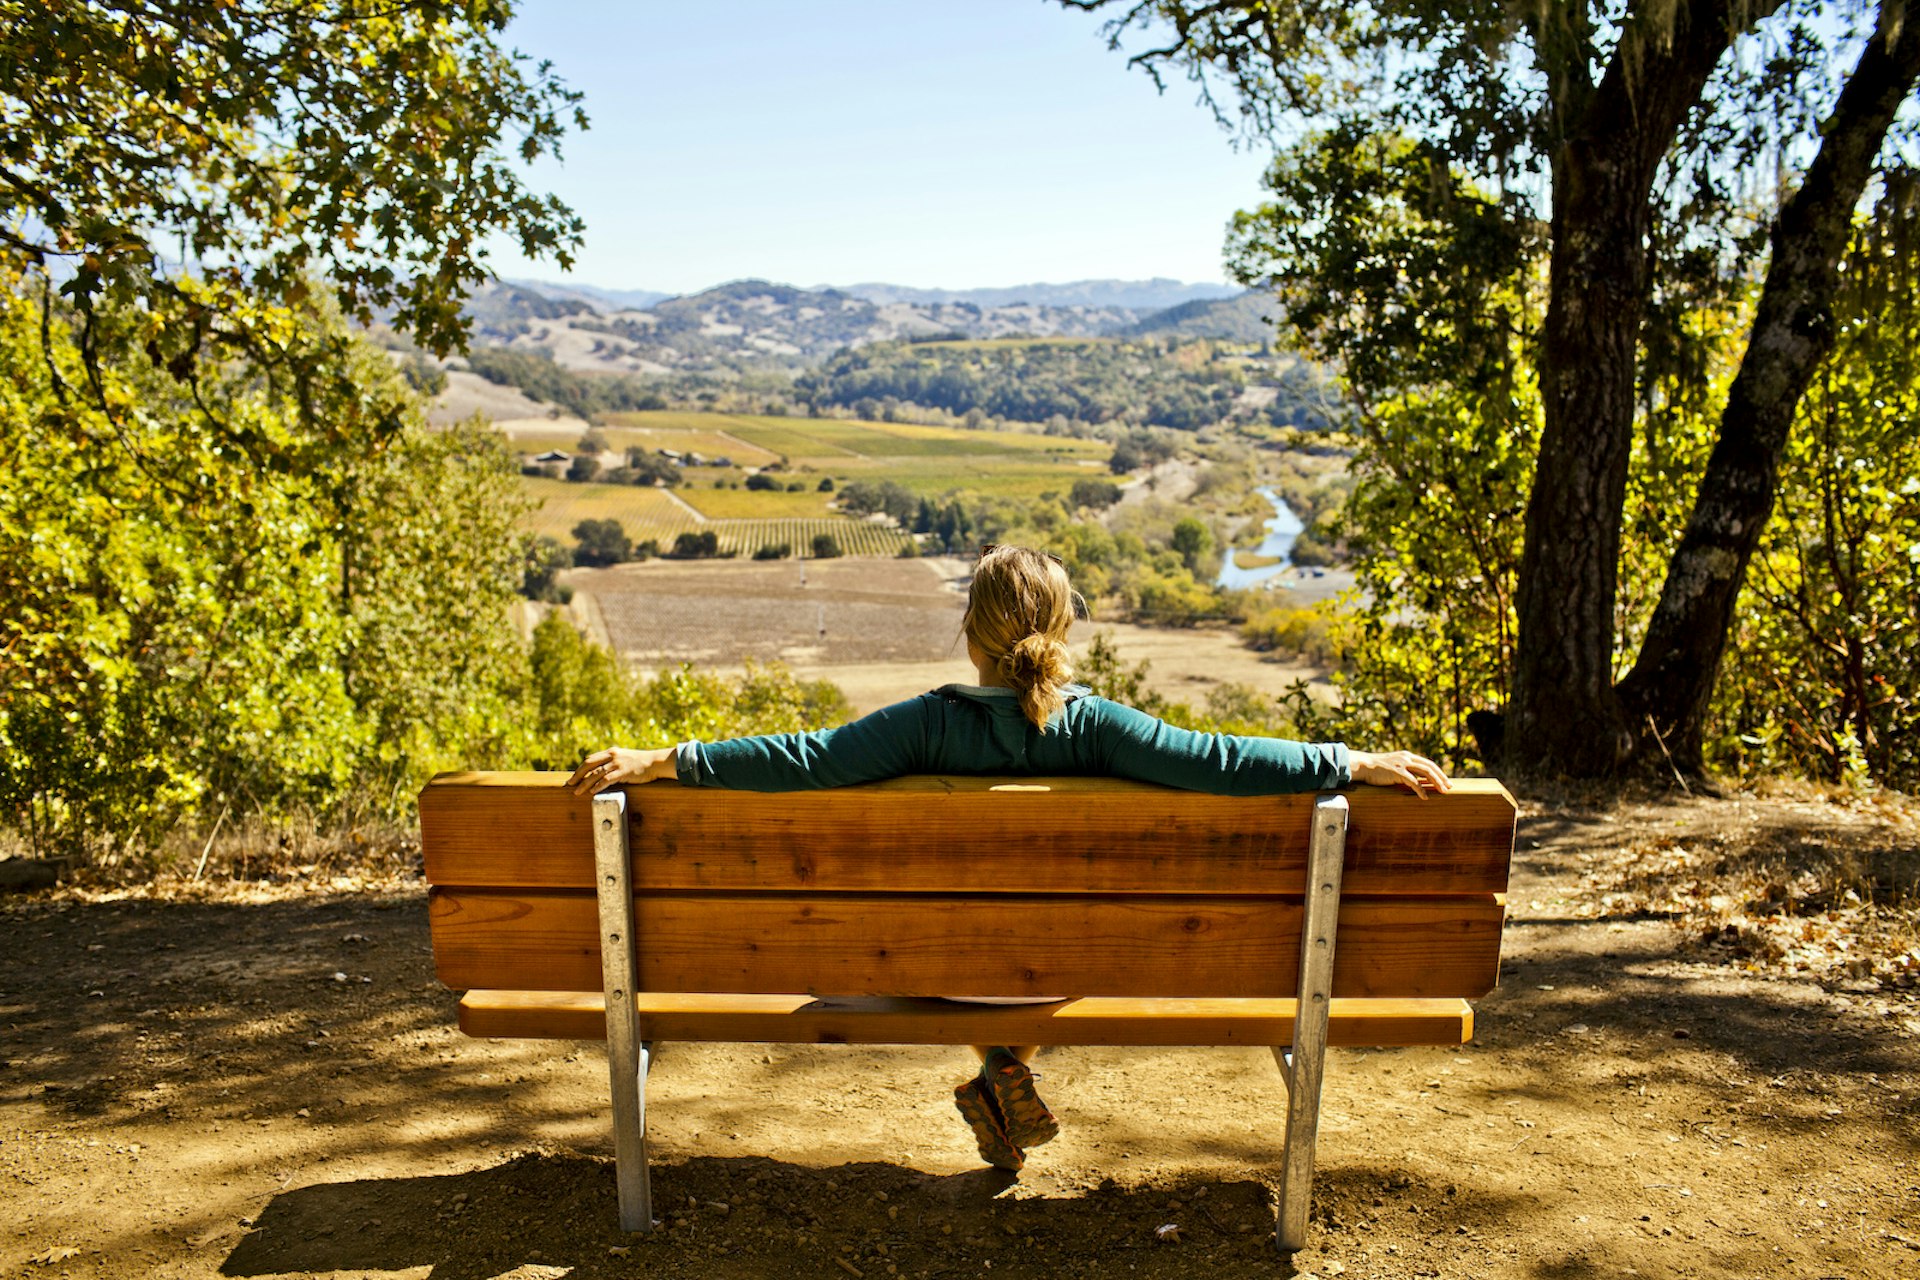 A woman sitting on a bench looking out over the countryside of Sonoma County, California